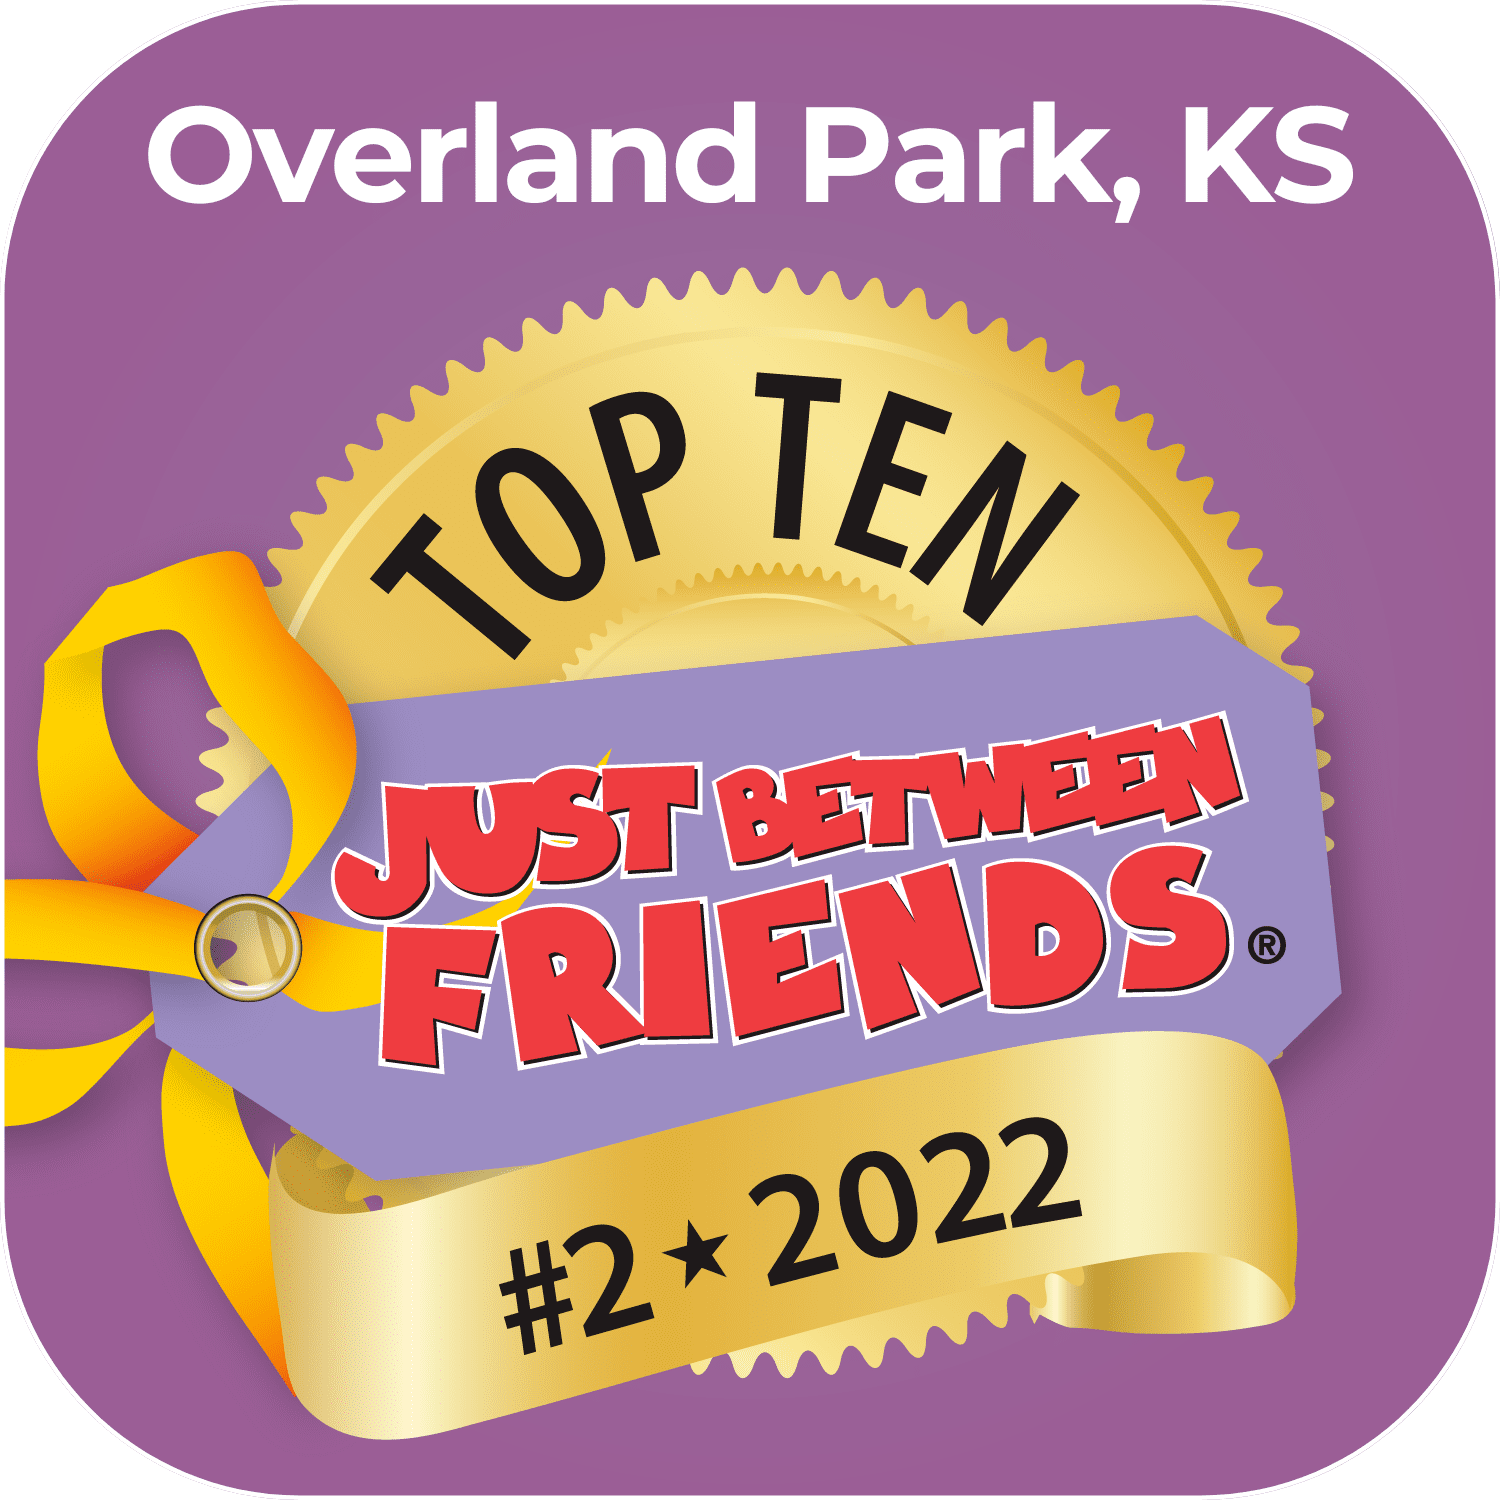 Overland Park, KS Sale was the #2 Sale in 2022.